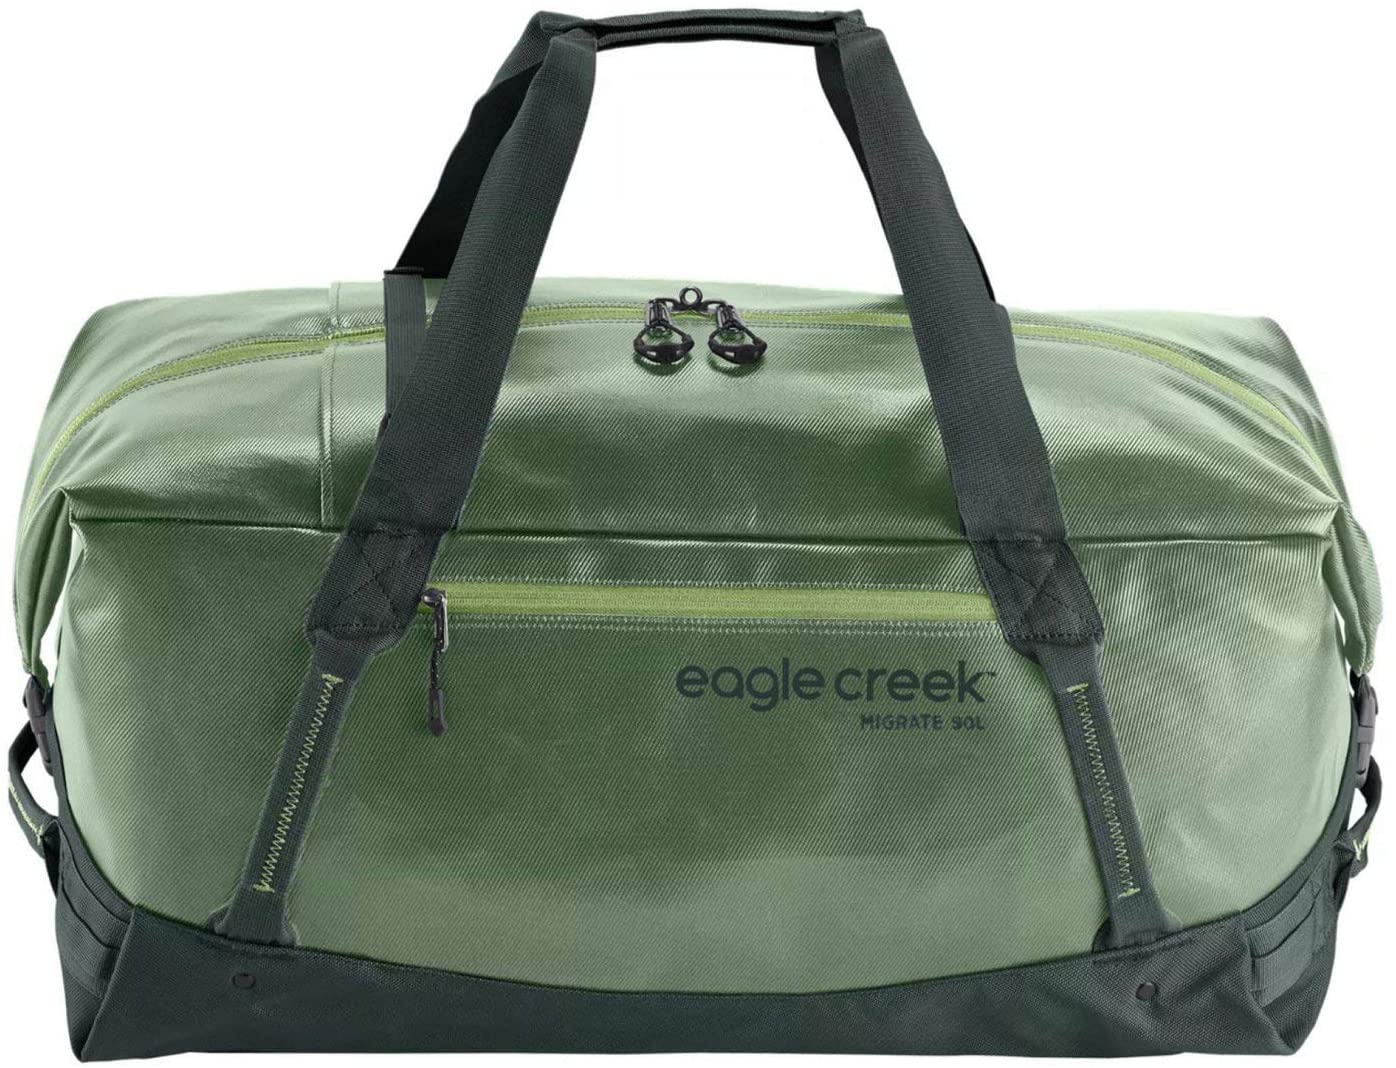 Eagle Creek Migrate Duffel 90 Liters in Mossy Green color from the front